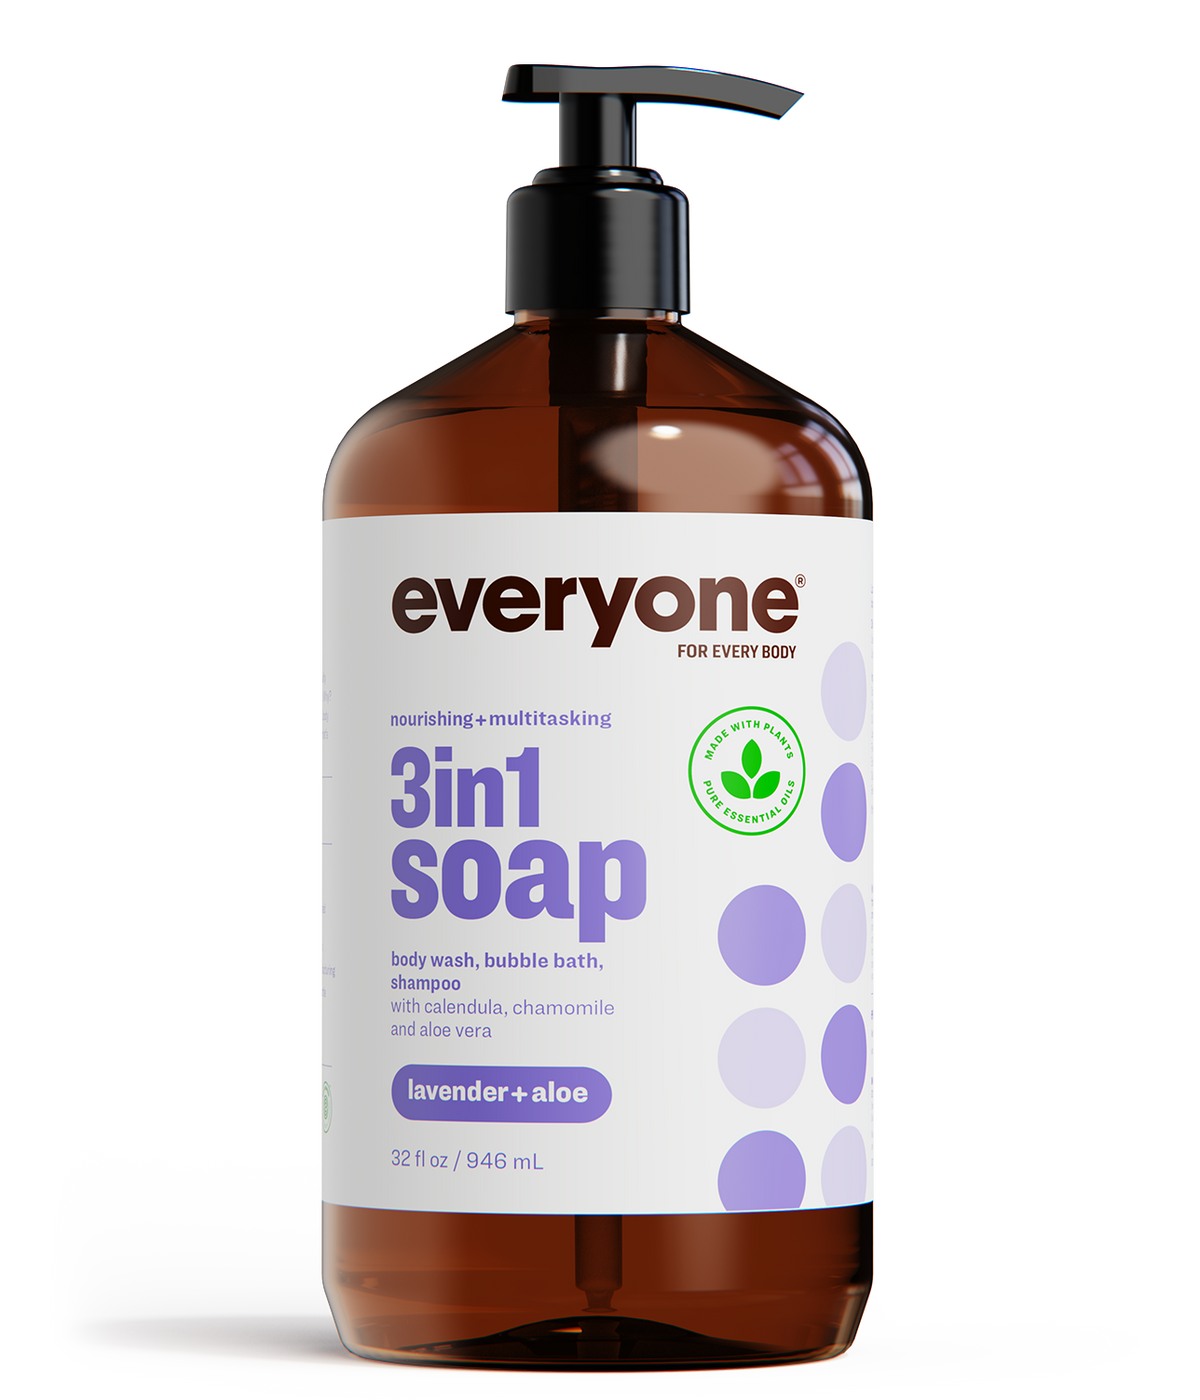 Lavender + Aloe 3in1 Soap - ProCare Outlet by EVERYONE